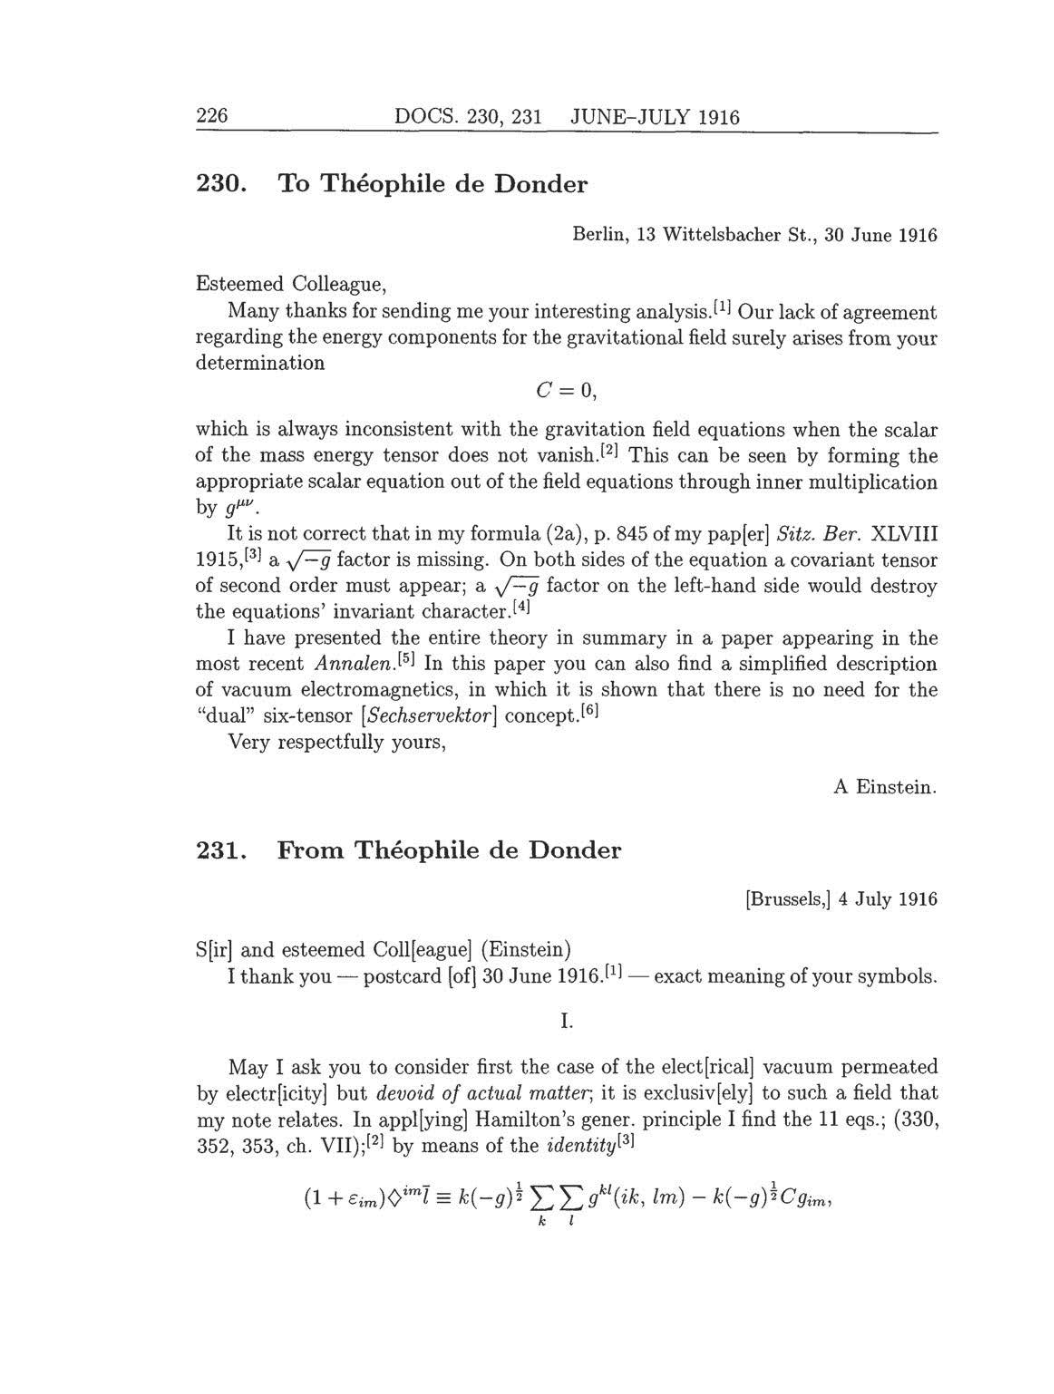 Volume 8: The Berlin Years: Correspondence, 1914-1918 (English translation supplement) page 226